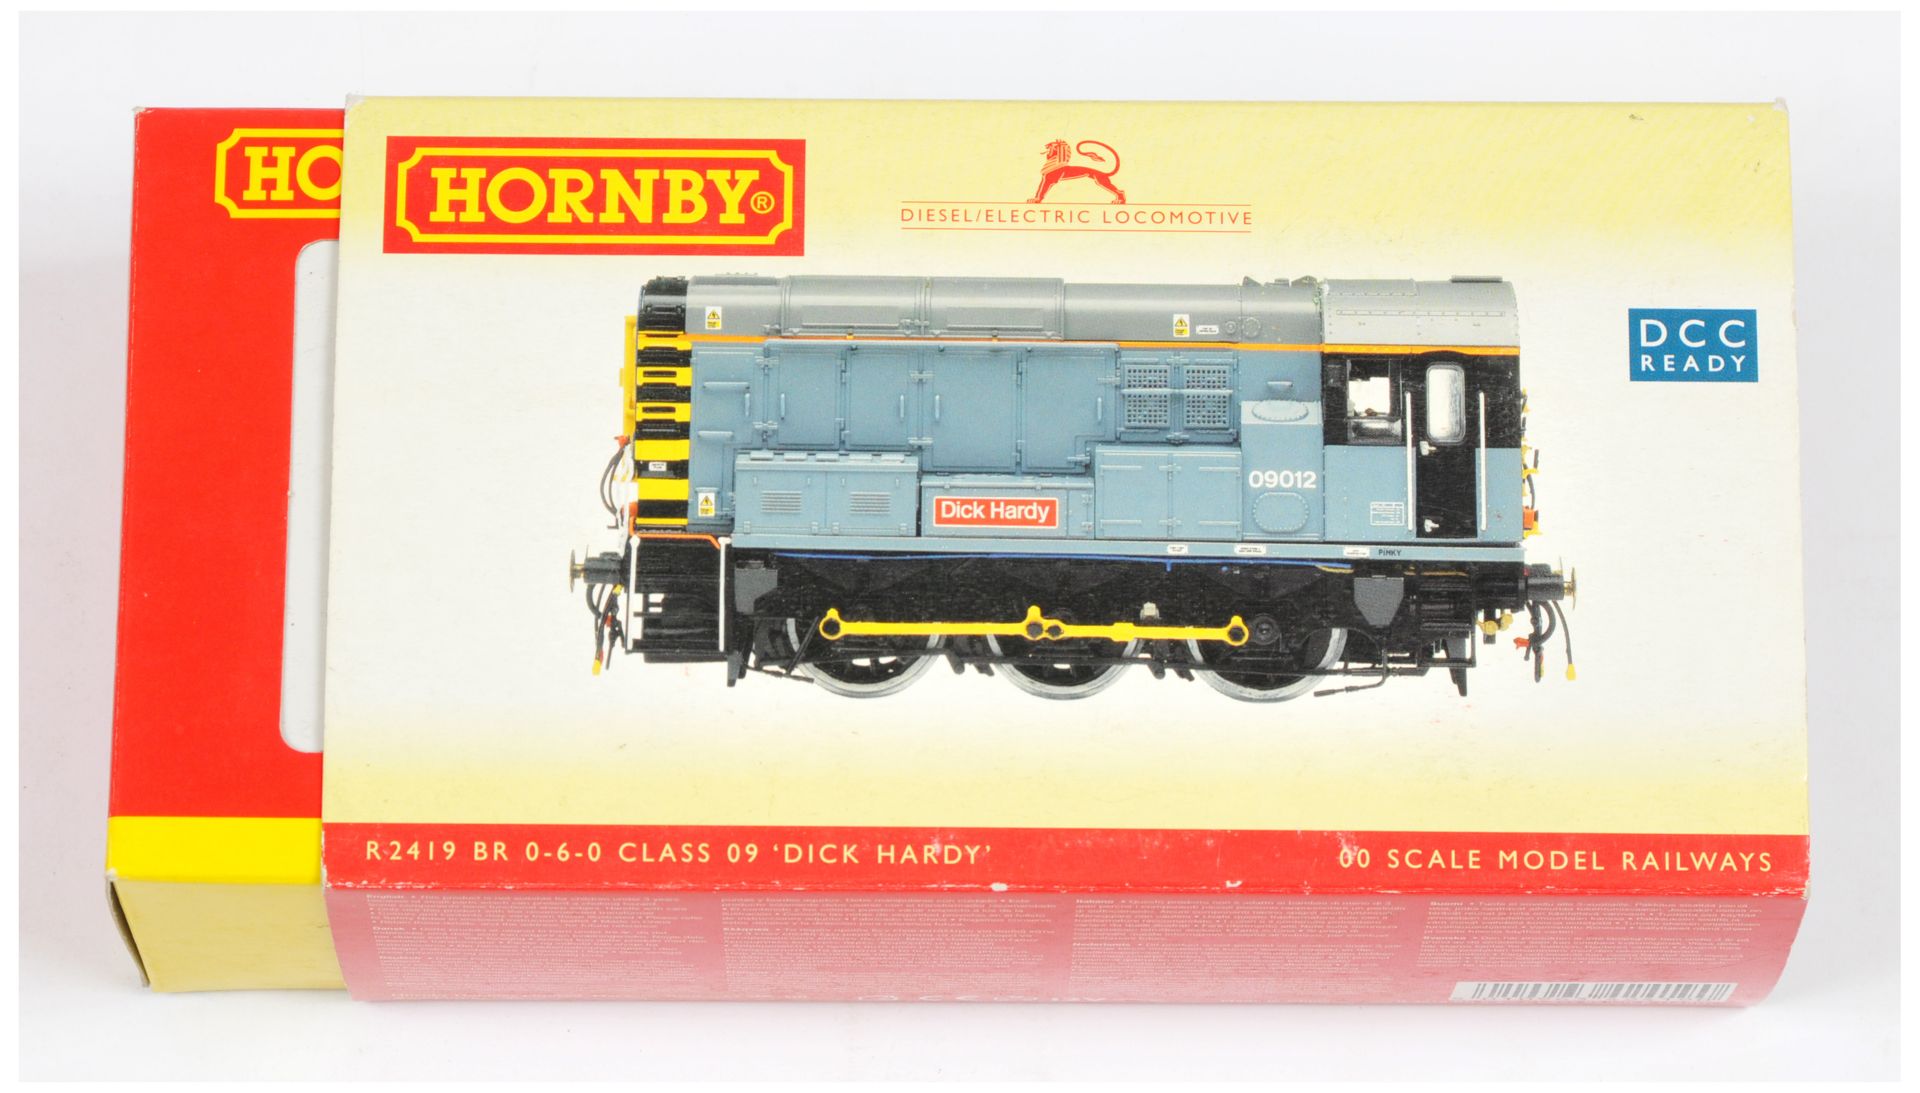 Hornby (China) R2419 0-6-0 Civil Engineers Class 09 Diesel Locomotive No. 09012 "Dick Hardy"